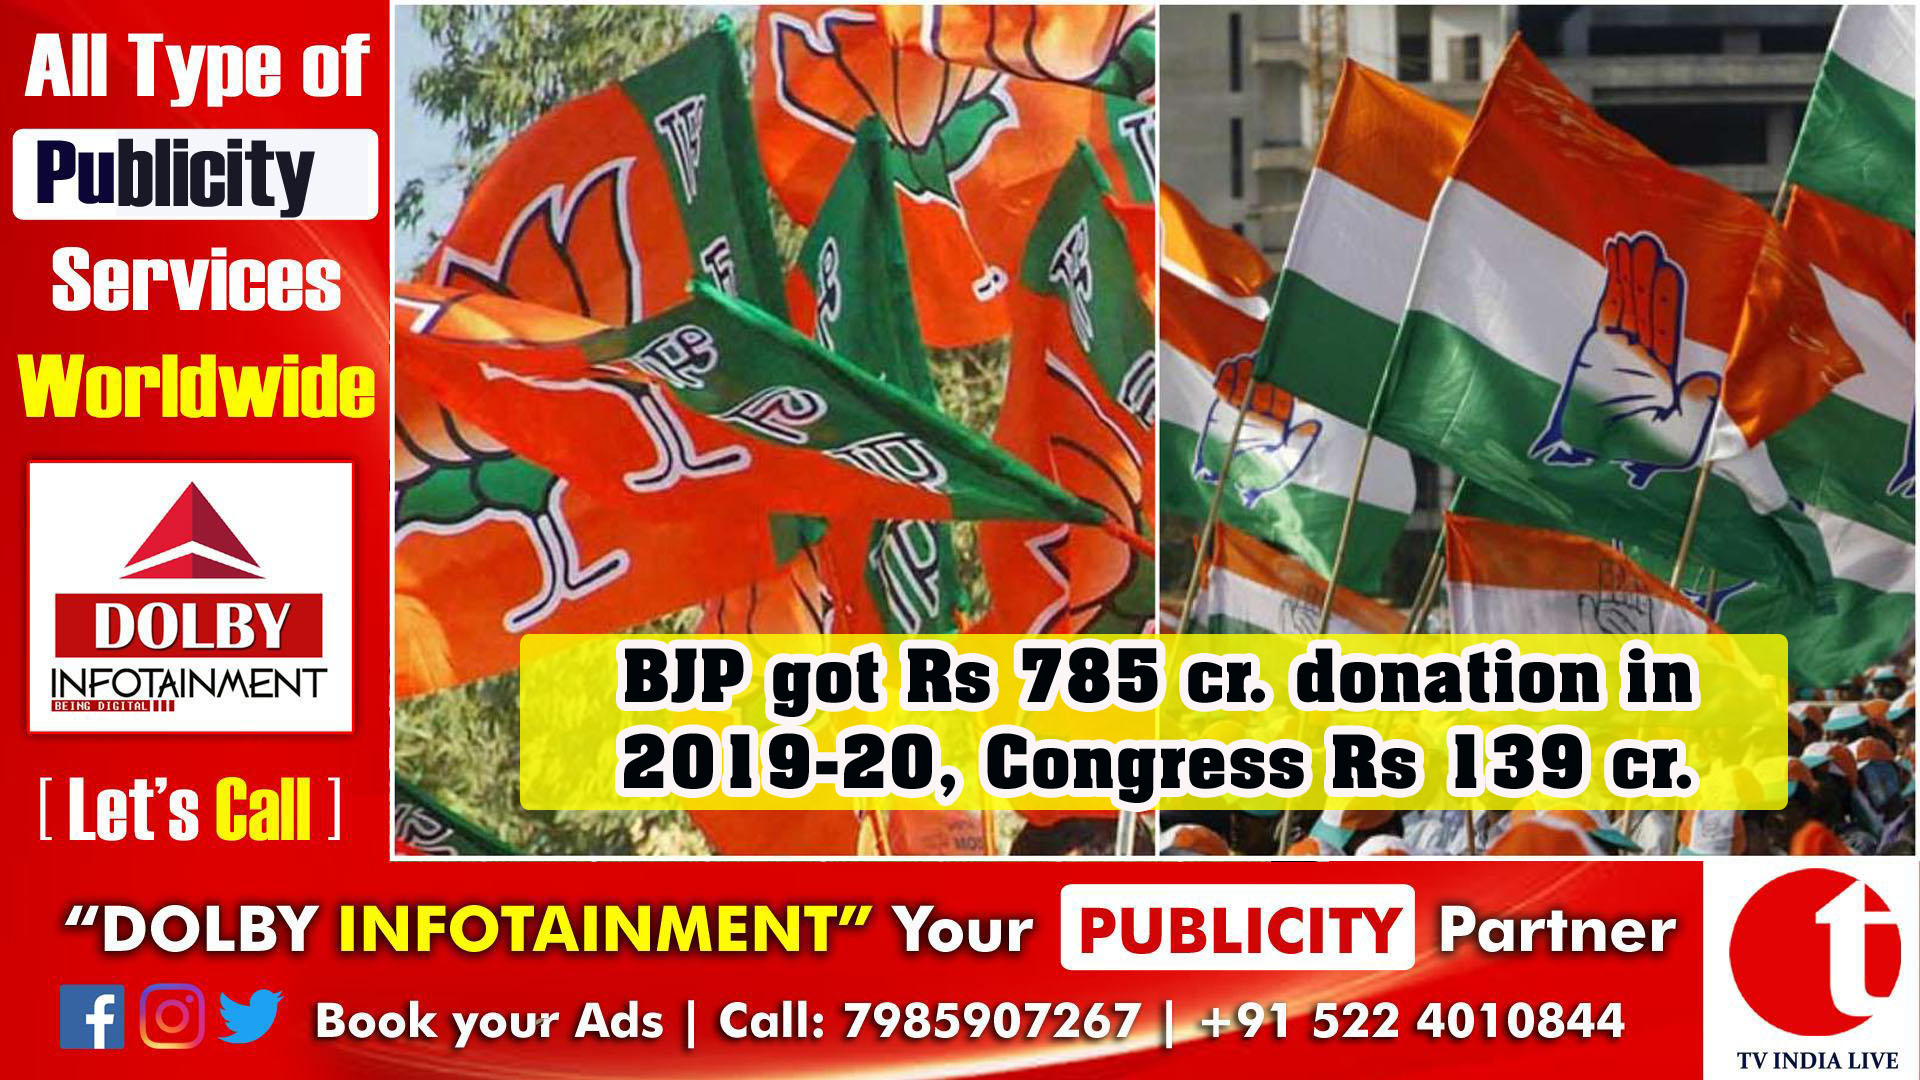 BJP got Rs 785 cr. donation in 2019-20, Congress Rs 139 cr.